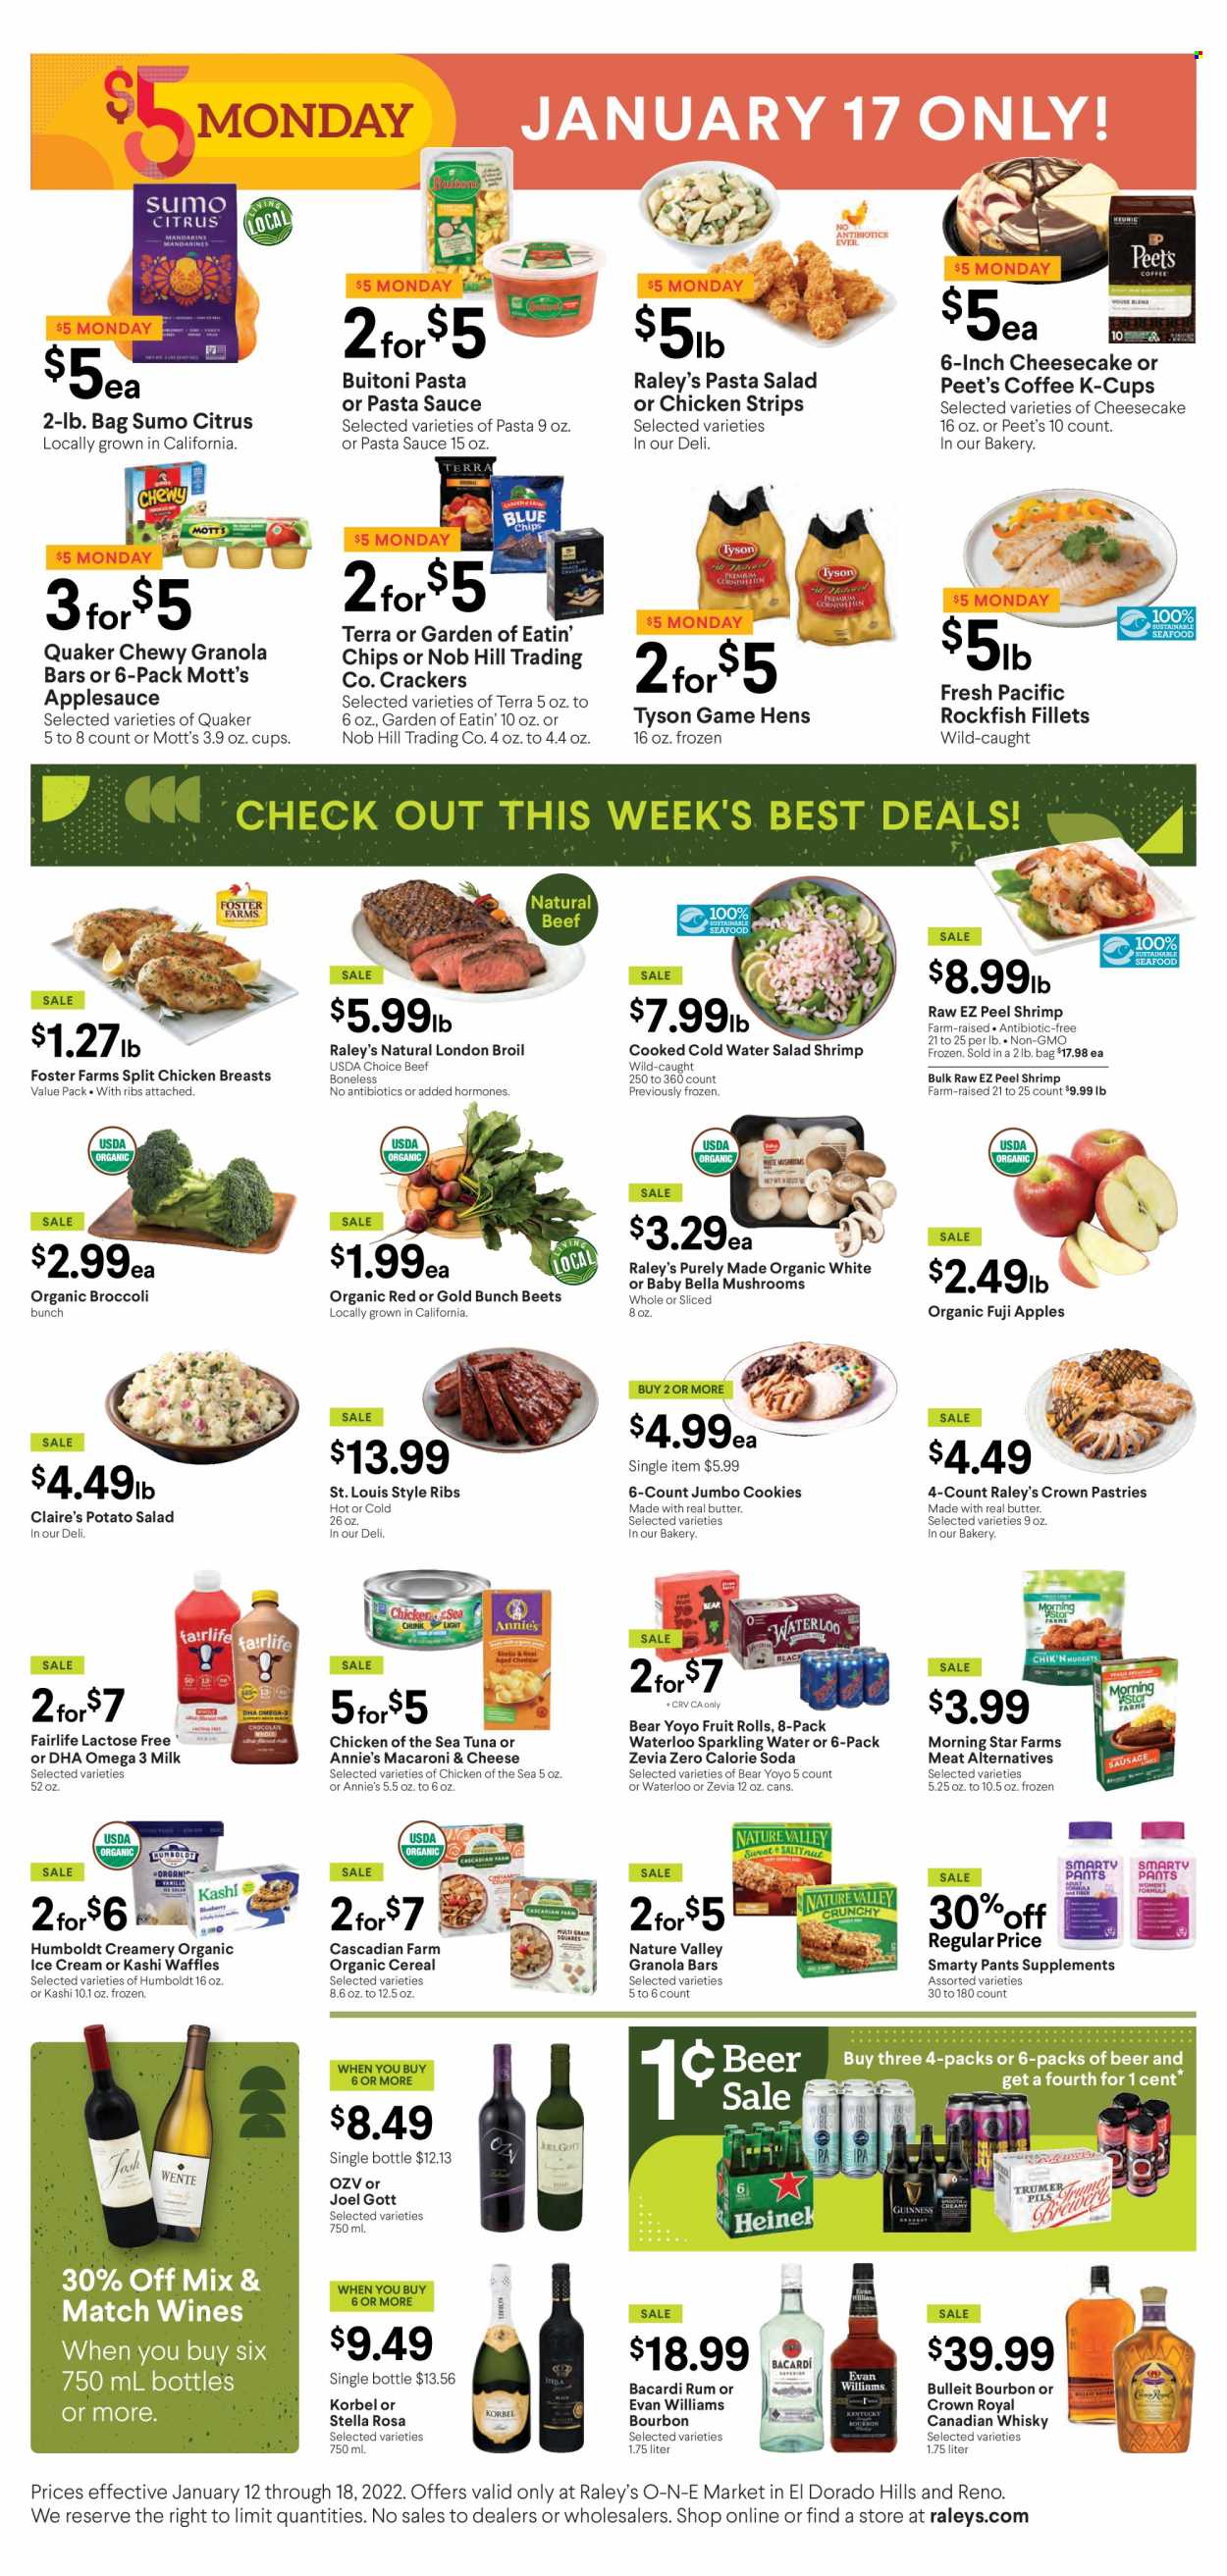 thumbnail - Raley's Flyer - 01/12/2022 - 01/18/2022 - Sales products - mushrooms, waffles, broccoli, Fuji apple, Mott's, rockfish, tuna, shrimps, macaroni & cheese, pasta sauce, sauce, Quaker, Annie's, Buitoni, potato salad, pasta salad, milk, butter, ice cream, strips, chicken strips, cookies, crackers, fruit rolls, Chicken of the Sea, cereals, granola bar, Nature Valley, apple sauce, soda, sparkling water, coffee, coffee capsules, K-Cups, Bacardi, bourbon, canadian whisky, rum, whisky, beer, chicken breasts, pants, Omega-3, sumo citrus. Page 2.